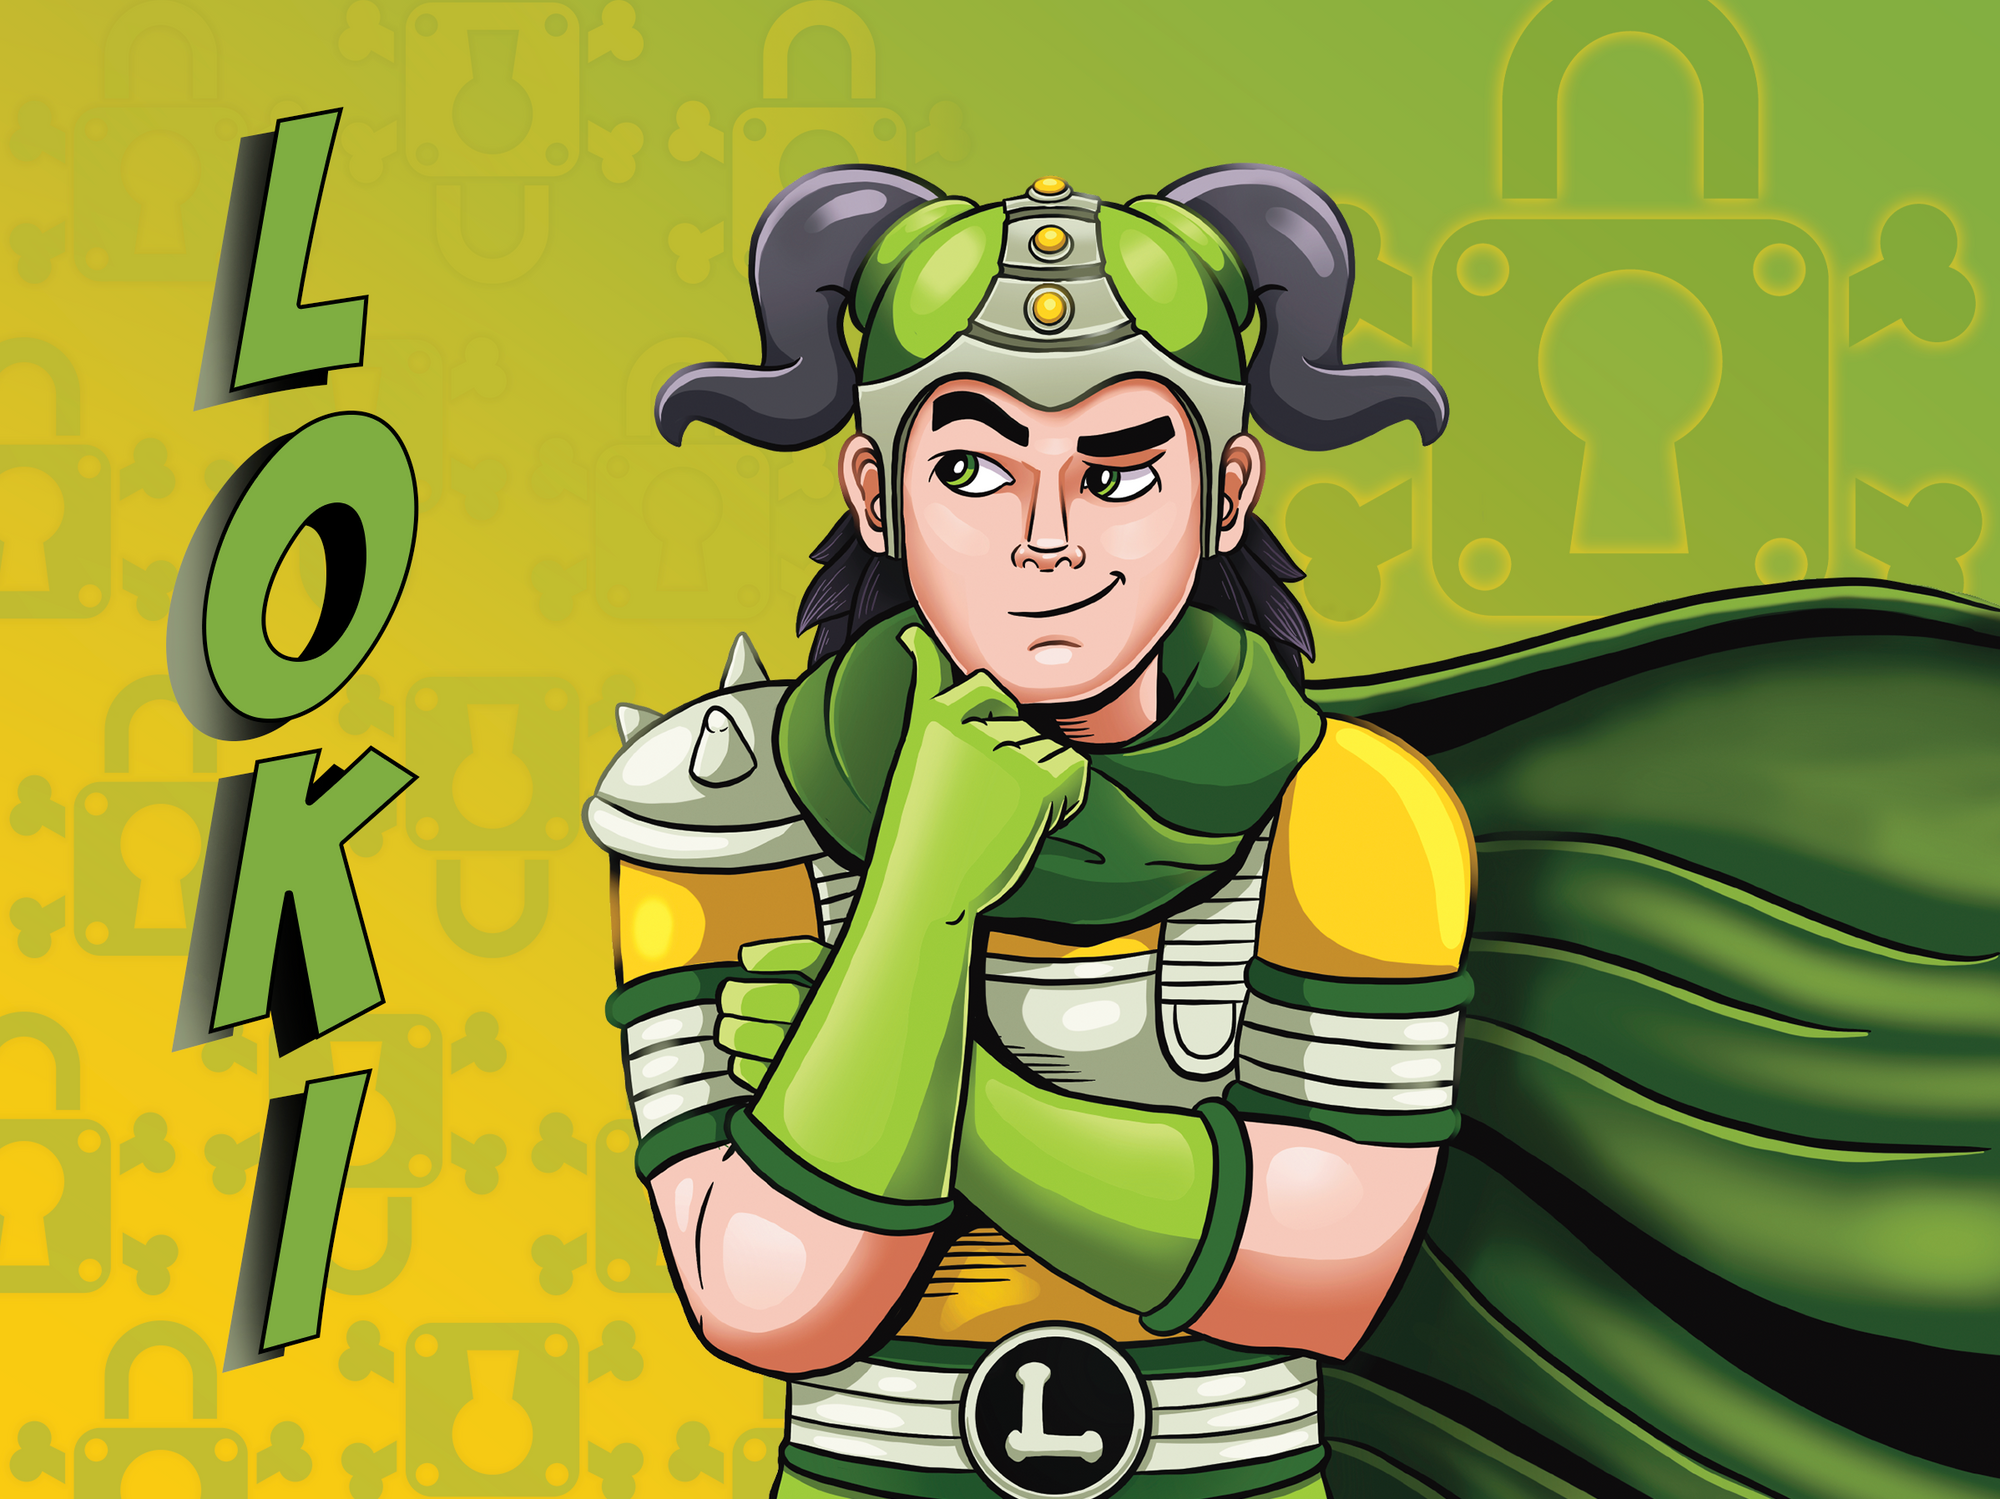 Comic style Norse folk lore character, wearing horned lemon lime helmet with lock and bone icon in background, with name title Loki